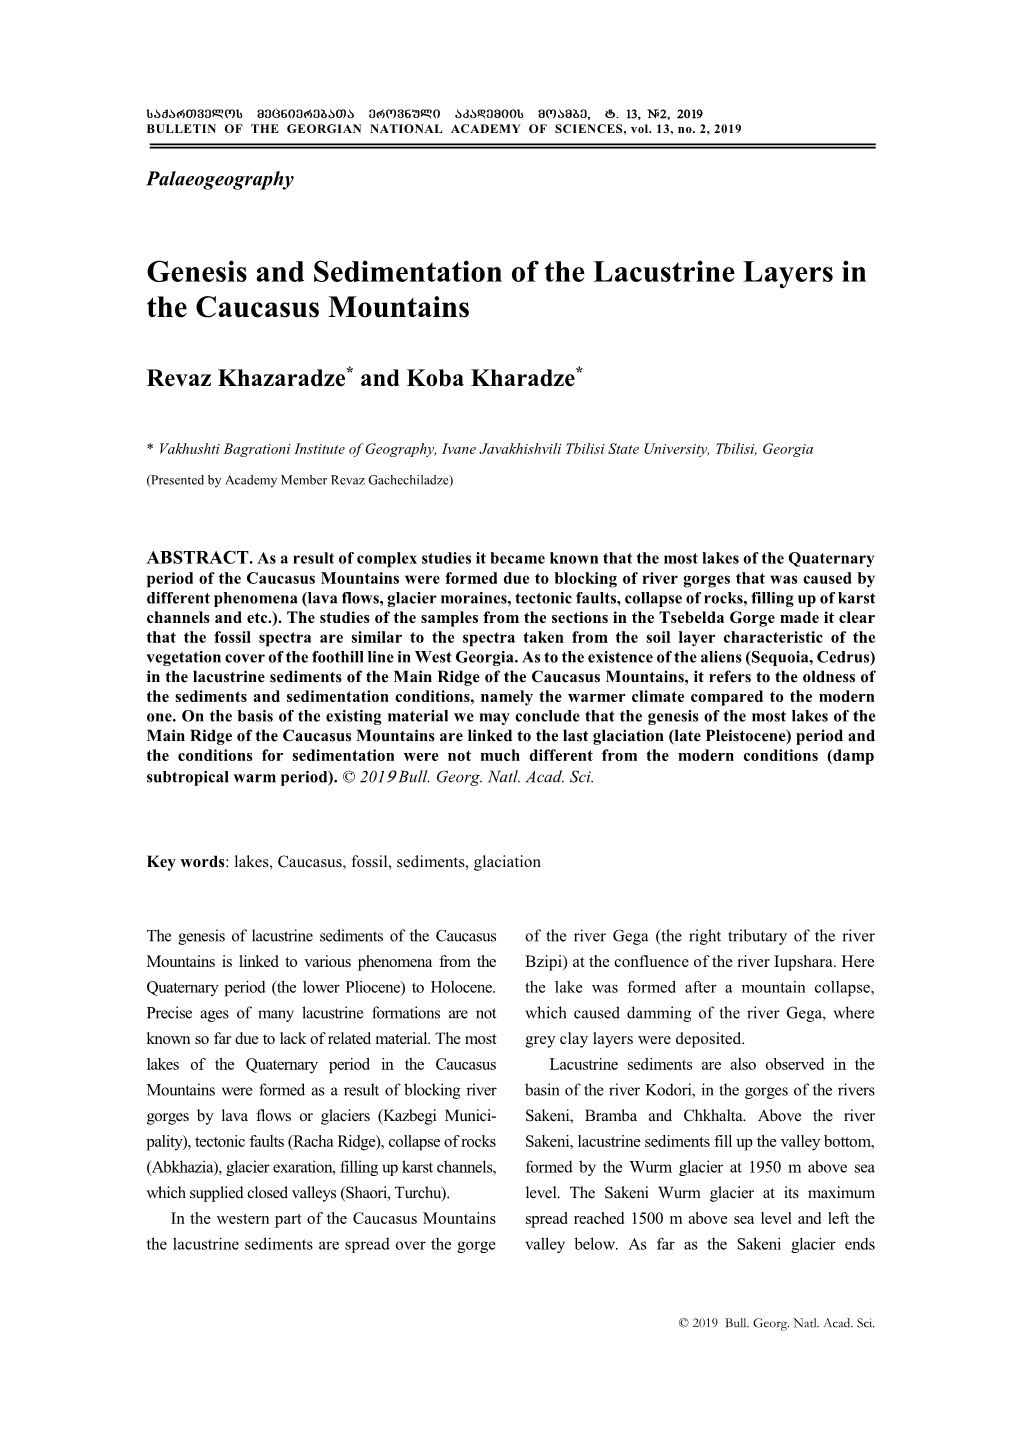 Genesis and Sedimentation of the Lacustrine Layers in the Caucasus Mountains